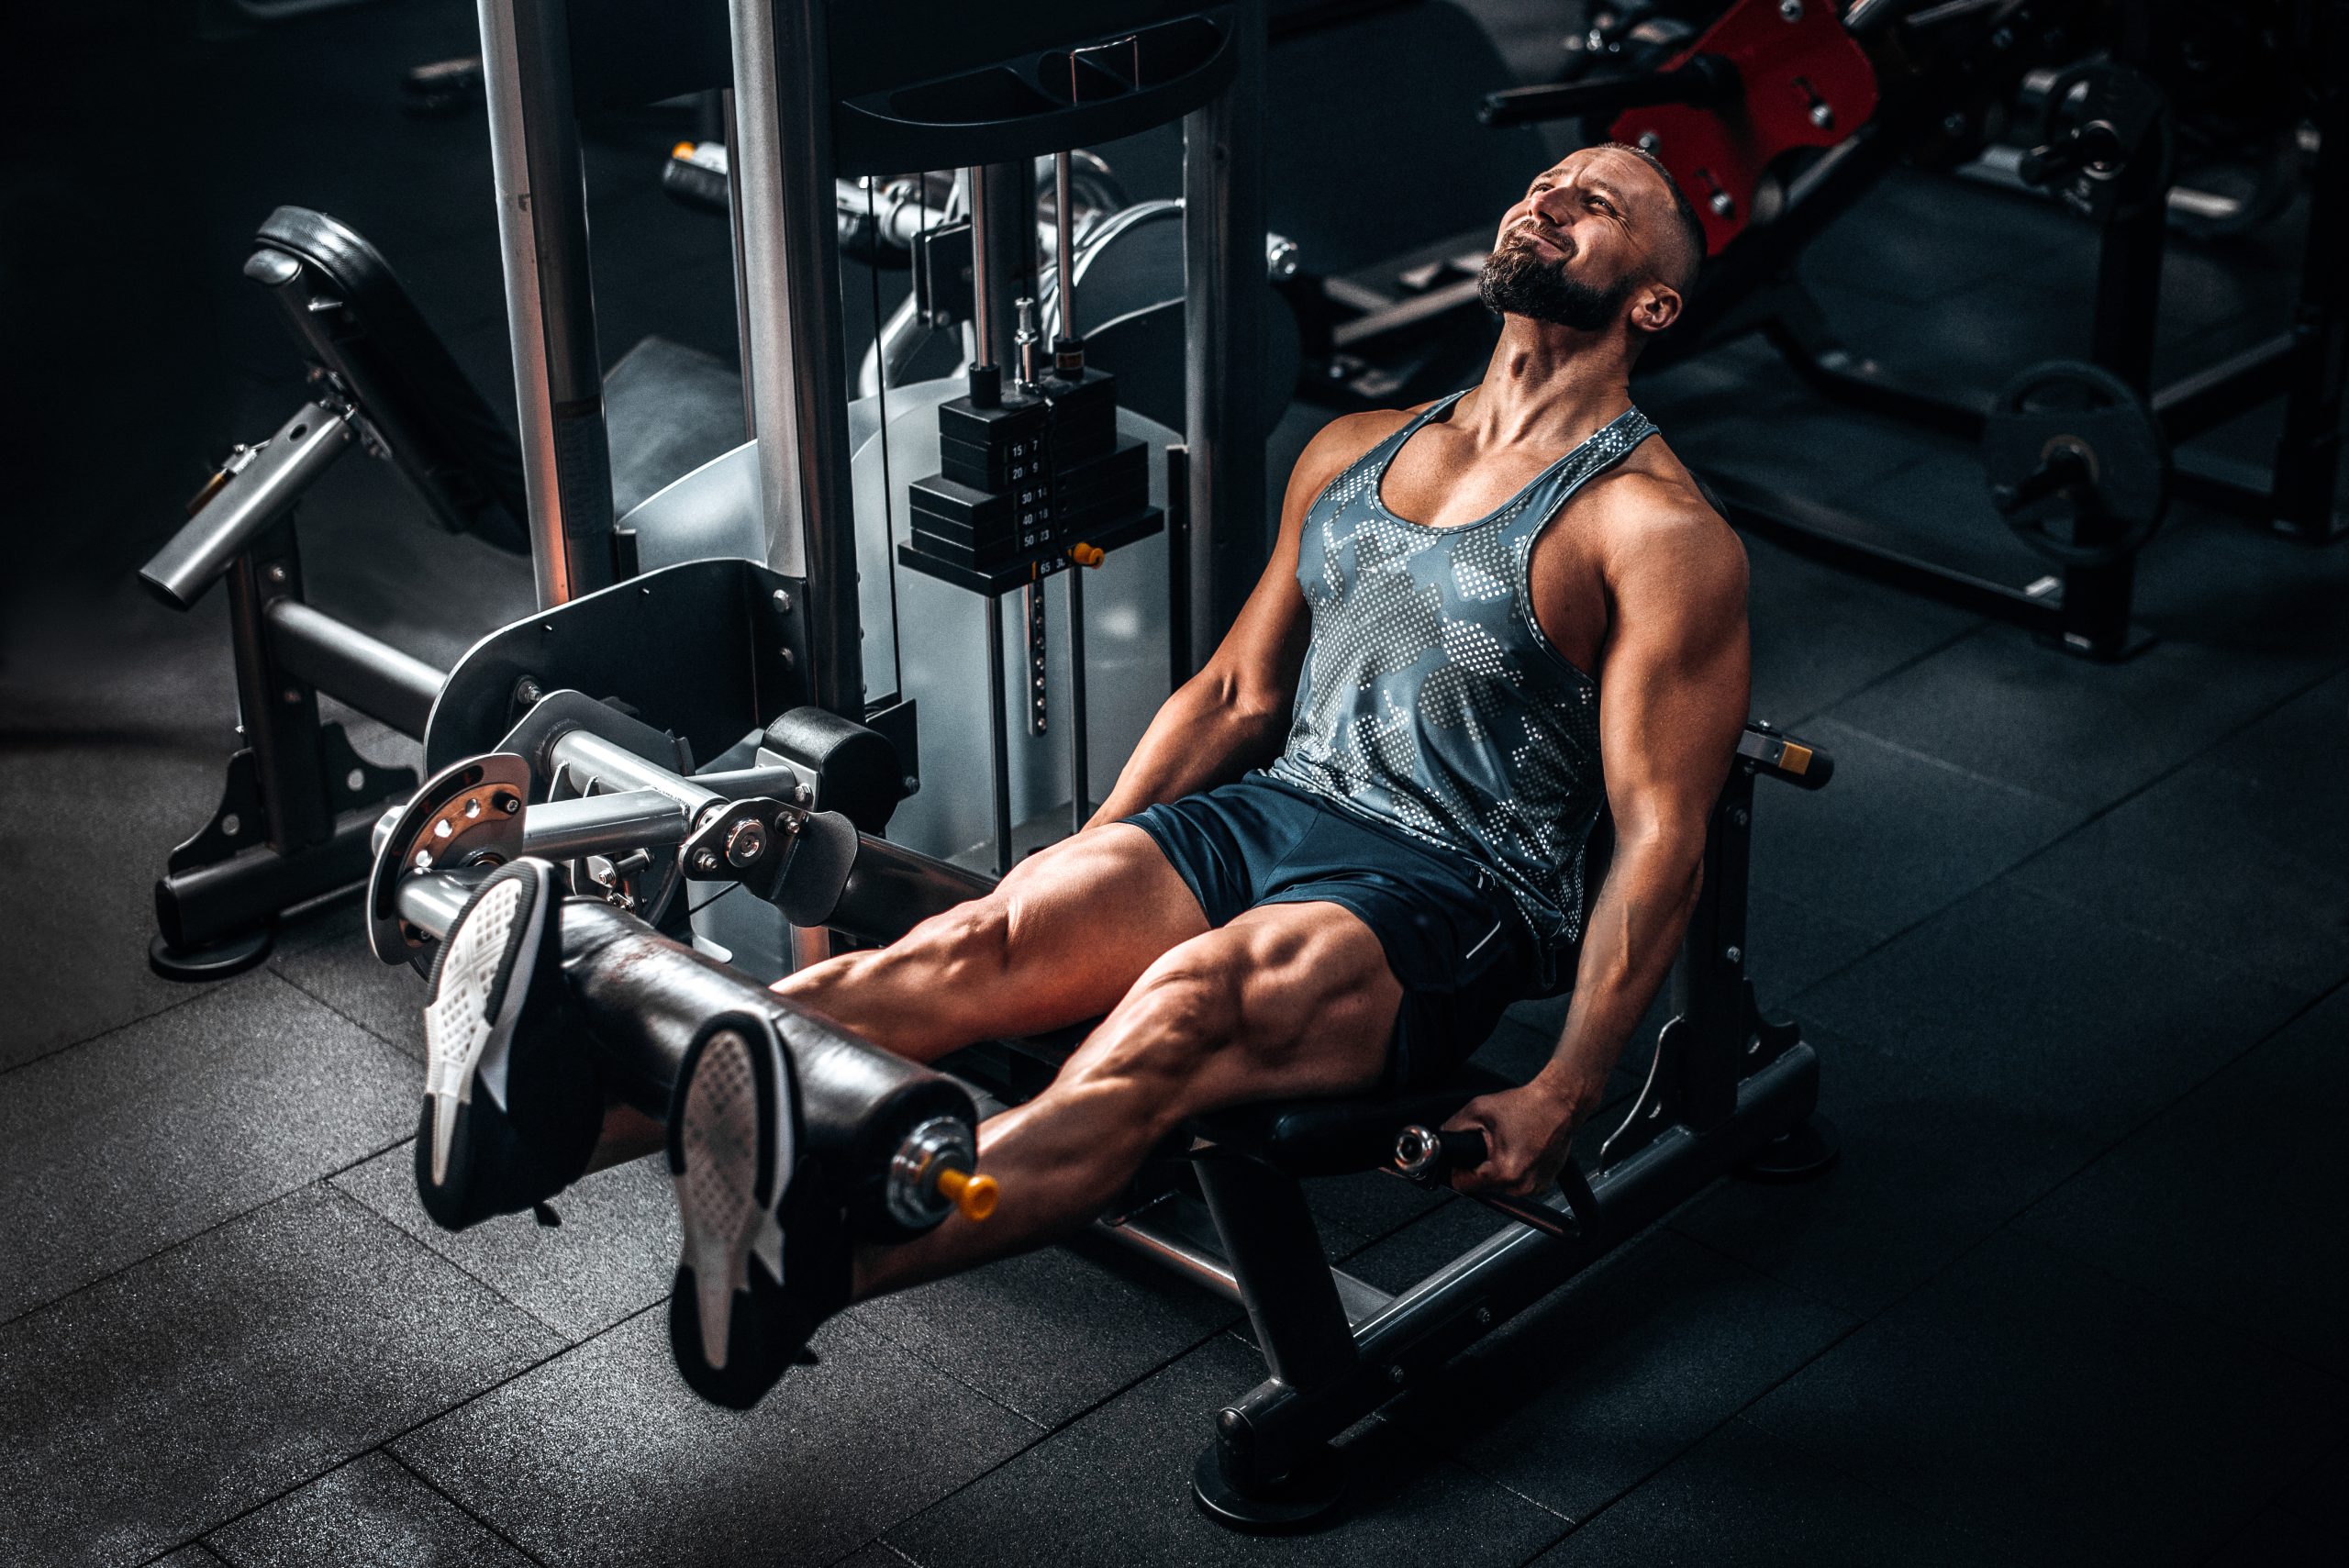 How to Do the Leg Press: Techniques, Benefits, Variations